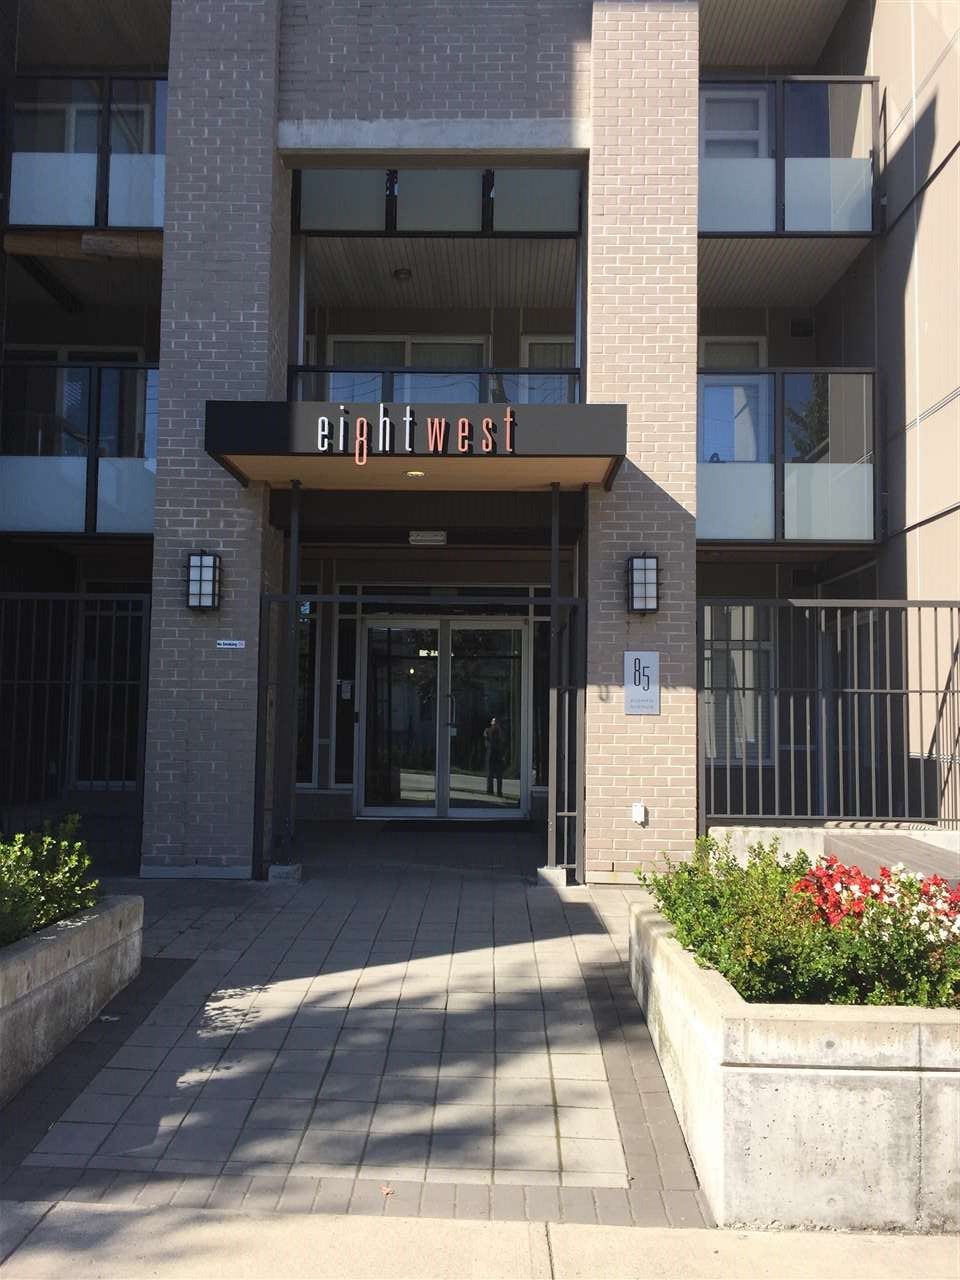 Main Photo: 307 85 EIGHTH AVENUE in : GlenBrooke North Condo for sale : MLS®# R2211066